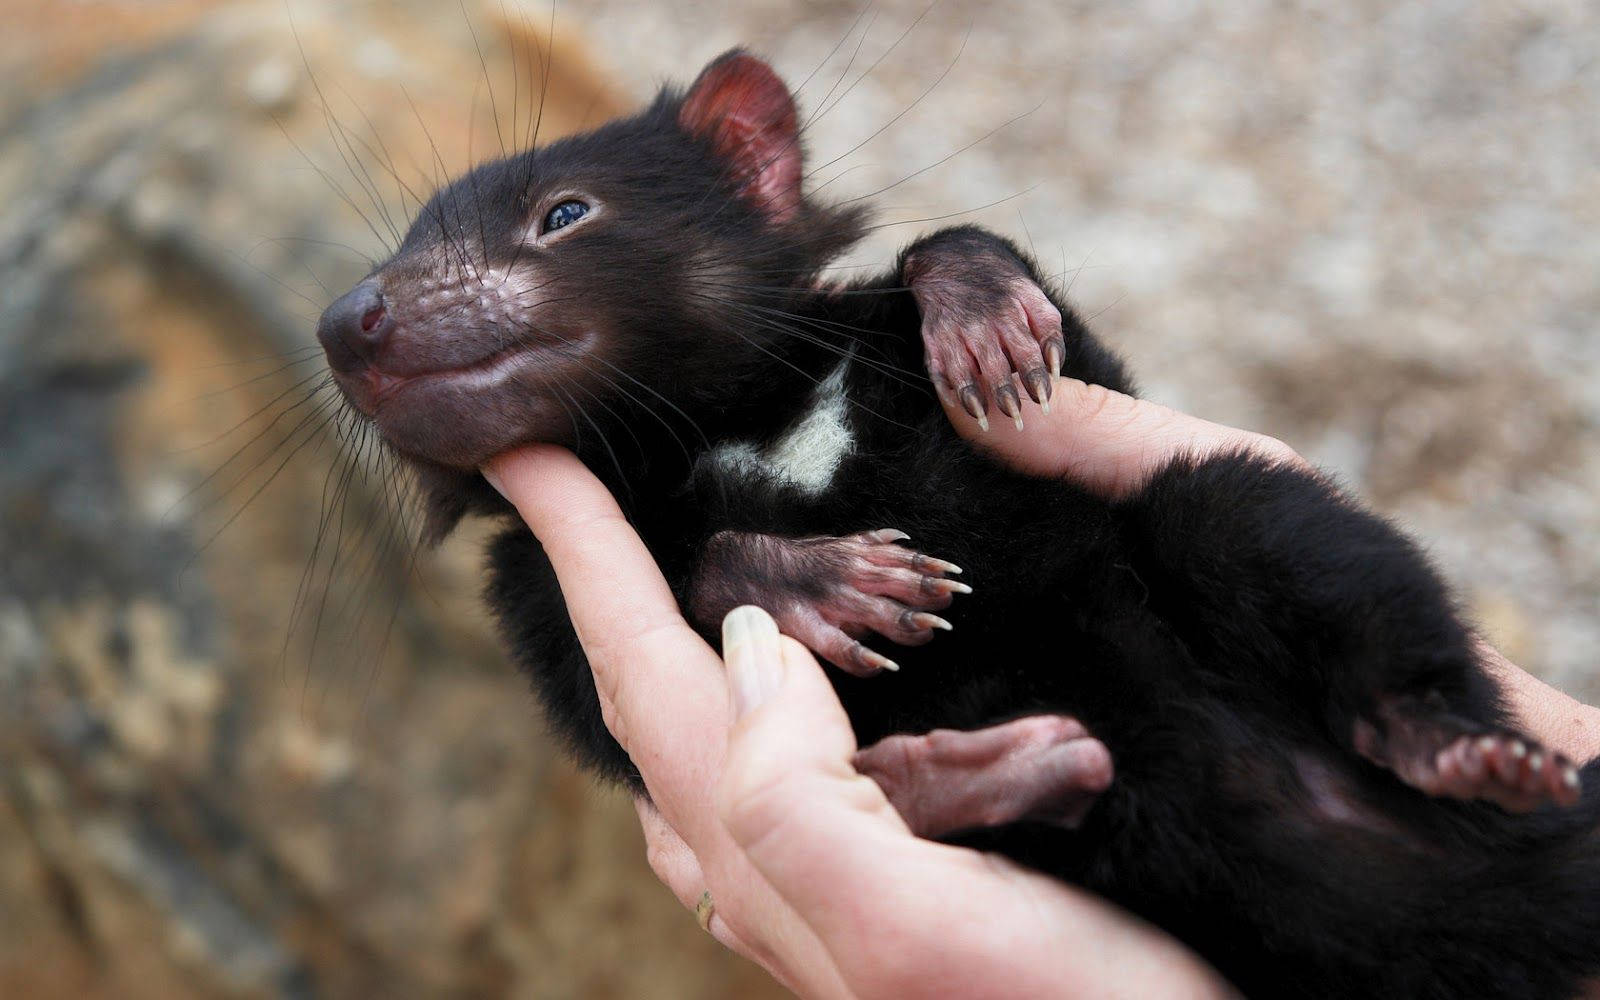 A Small Black Animal Being Held In Someone's Hand Background